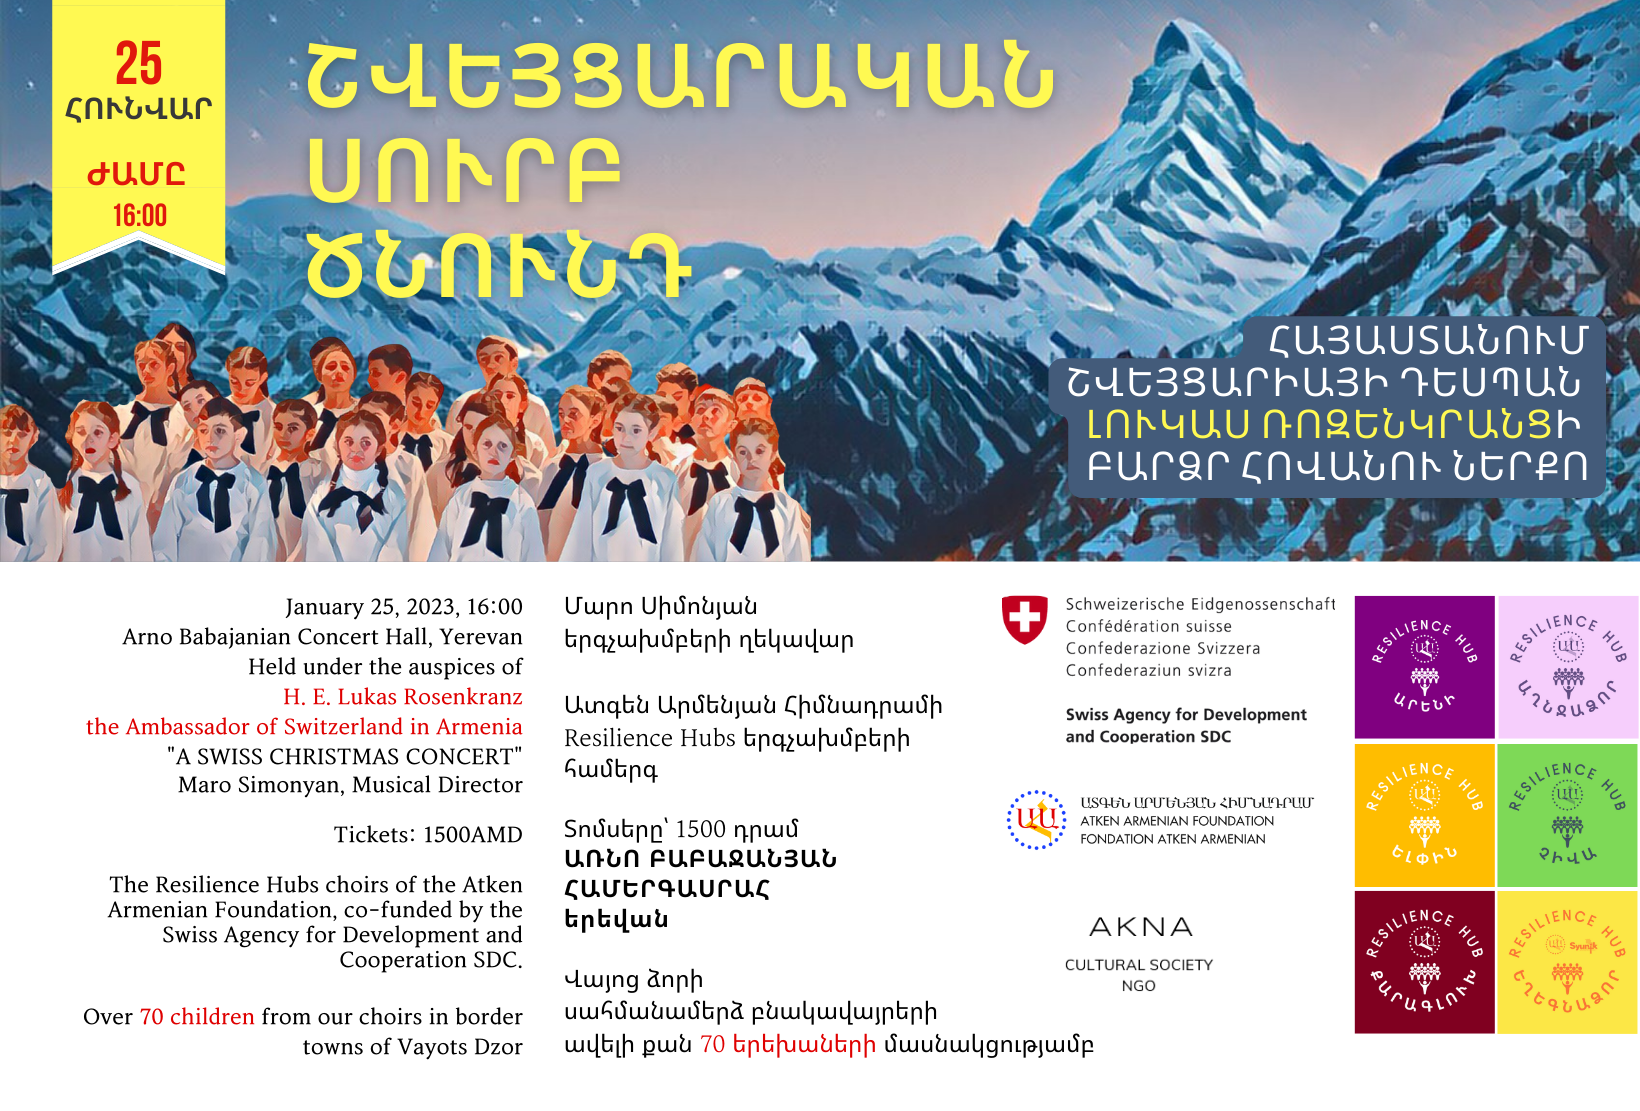 Resilience Hubs Choirs to do Joint Concert in Yerevan!